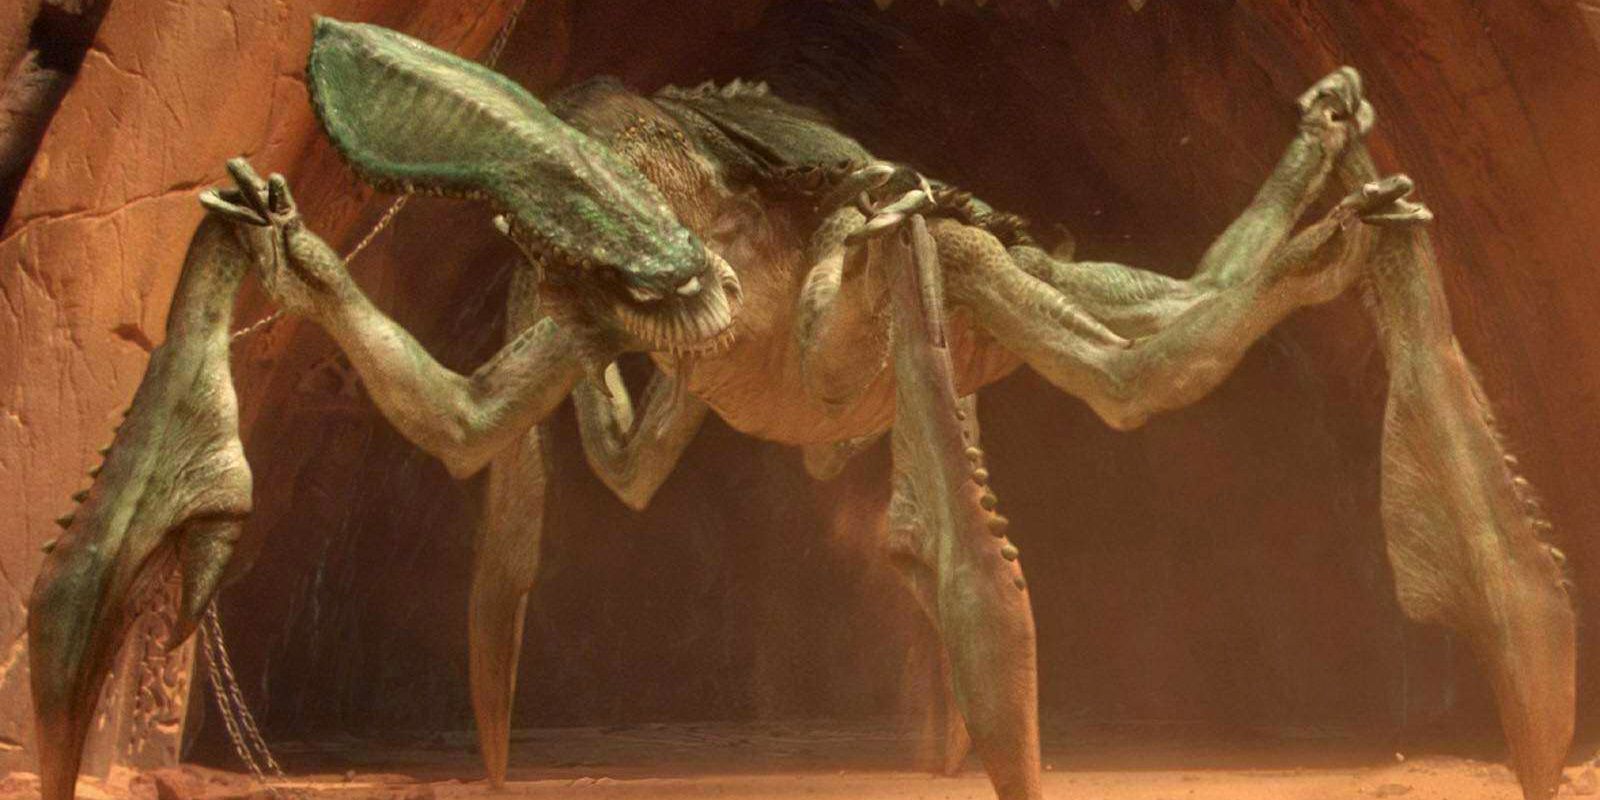 Acklay star wars creatures that want to kill you